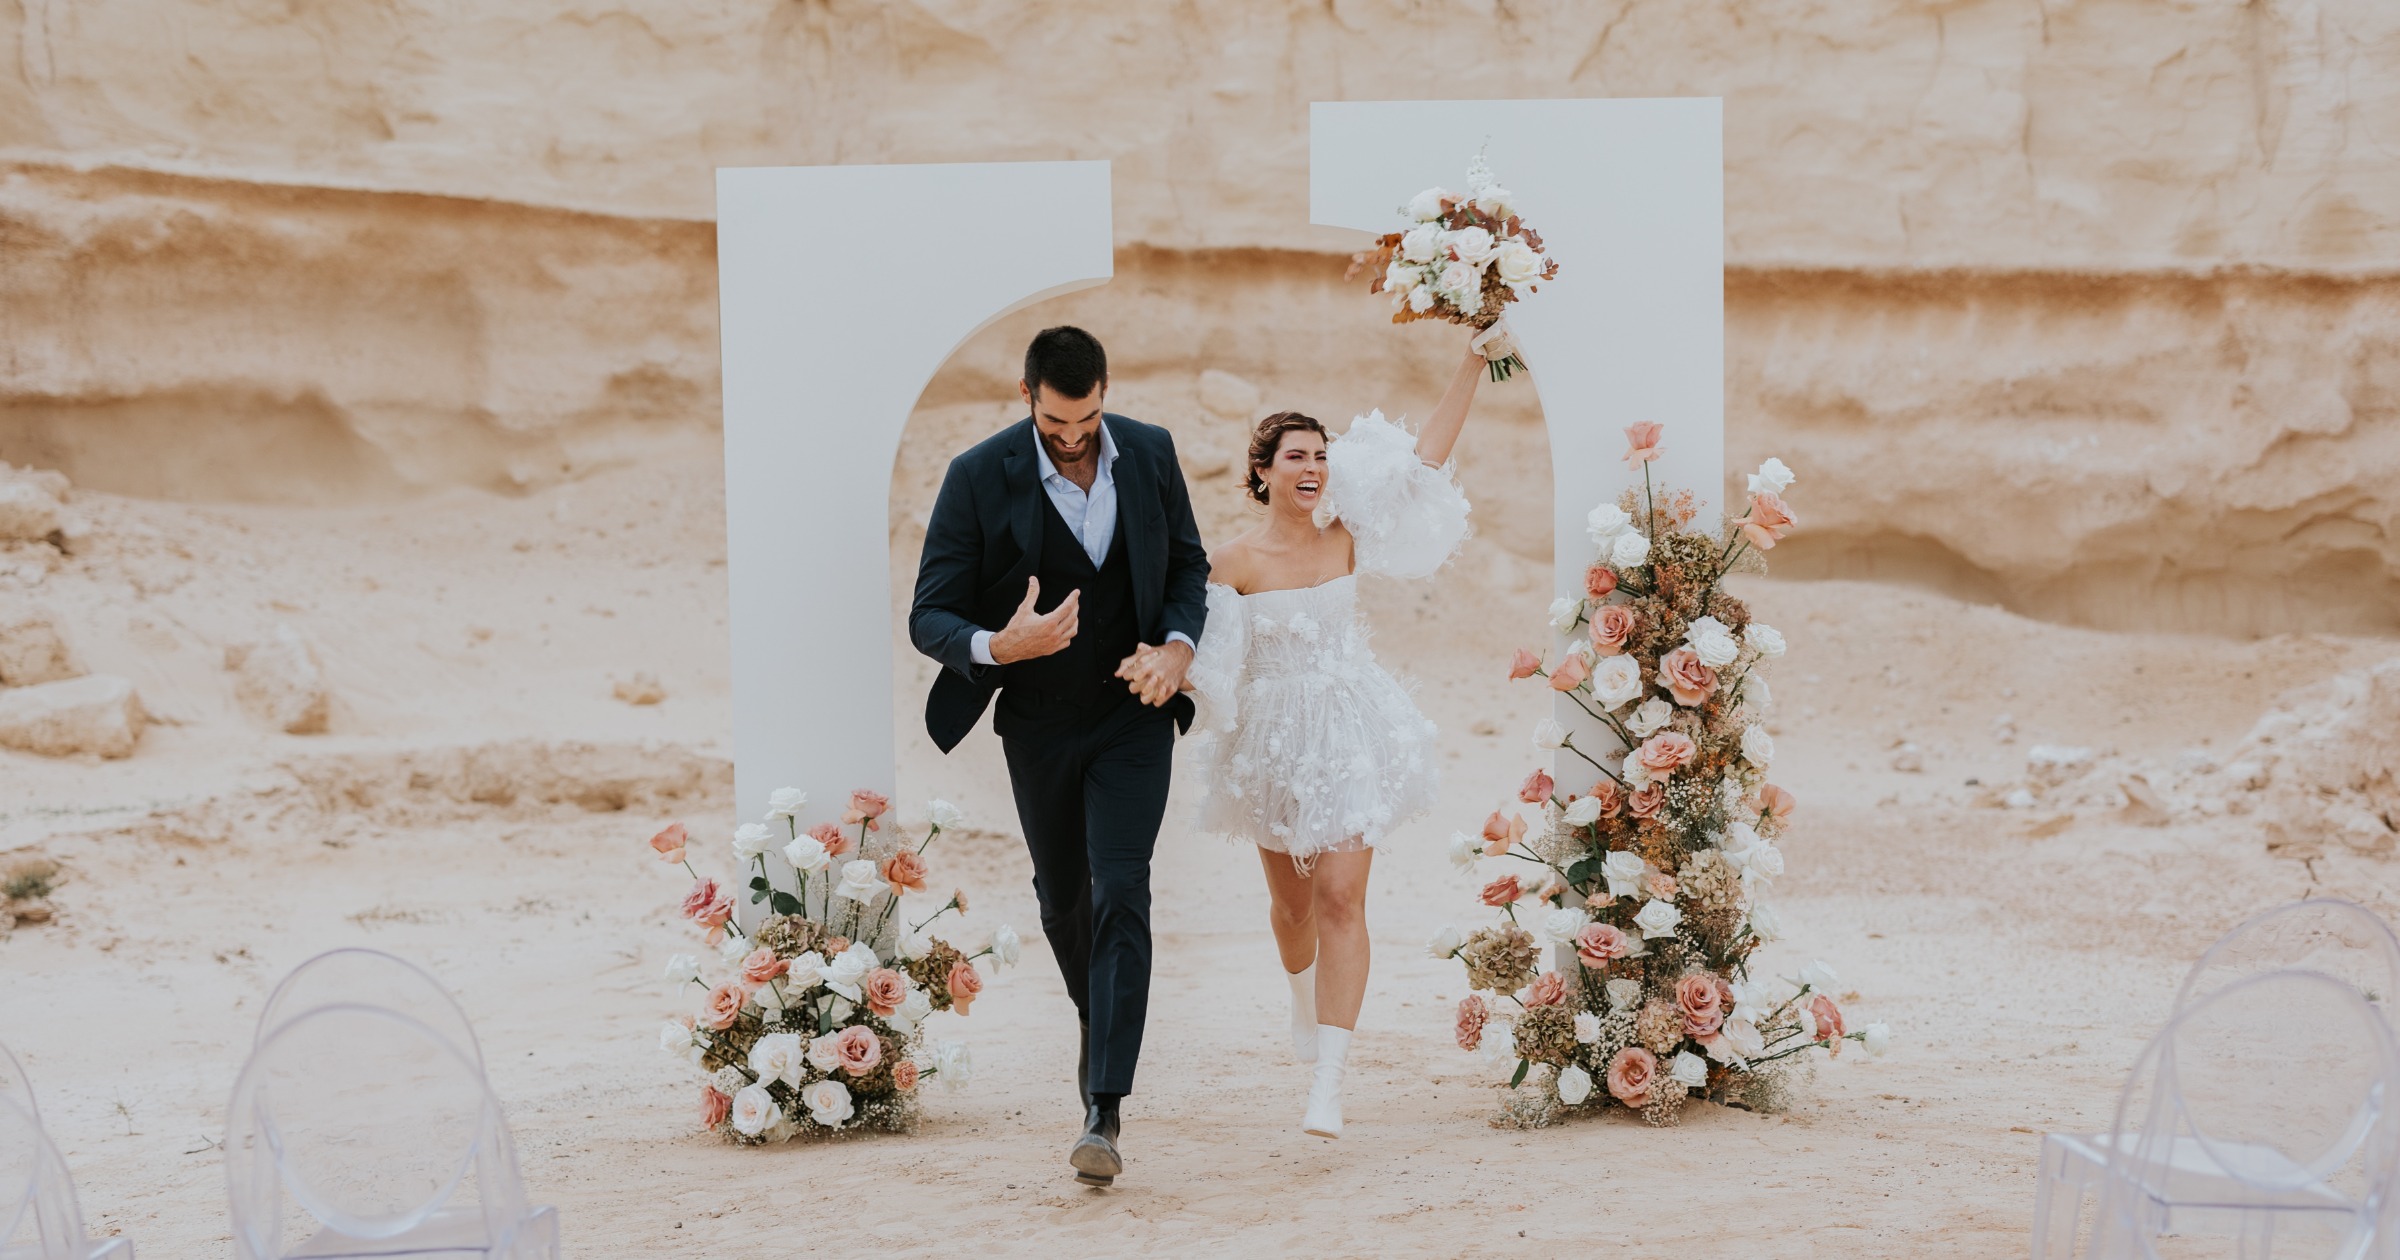 We’ve Found This Year’s Hottest Wedding Destination Thanks To The Dunas Project